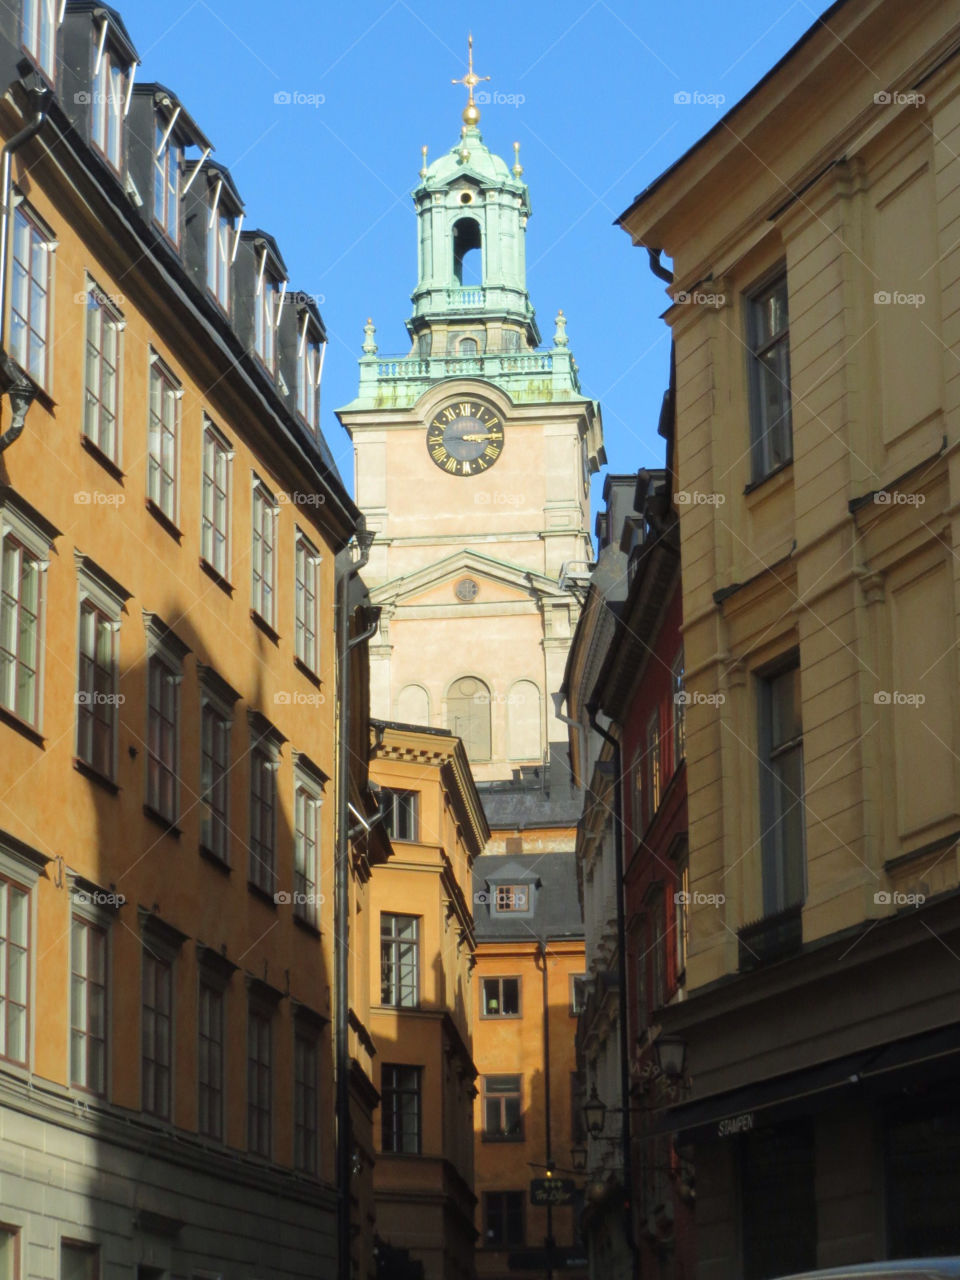 Churchtower in Old Town, Stockholm